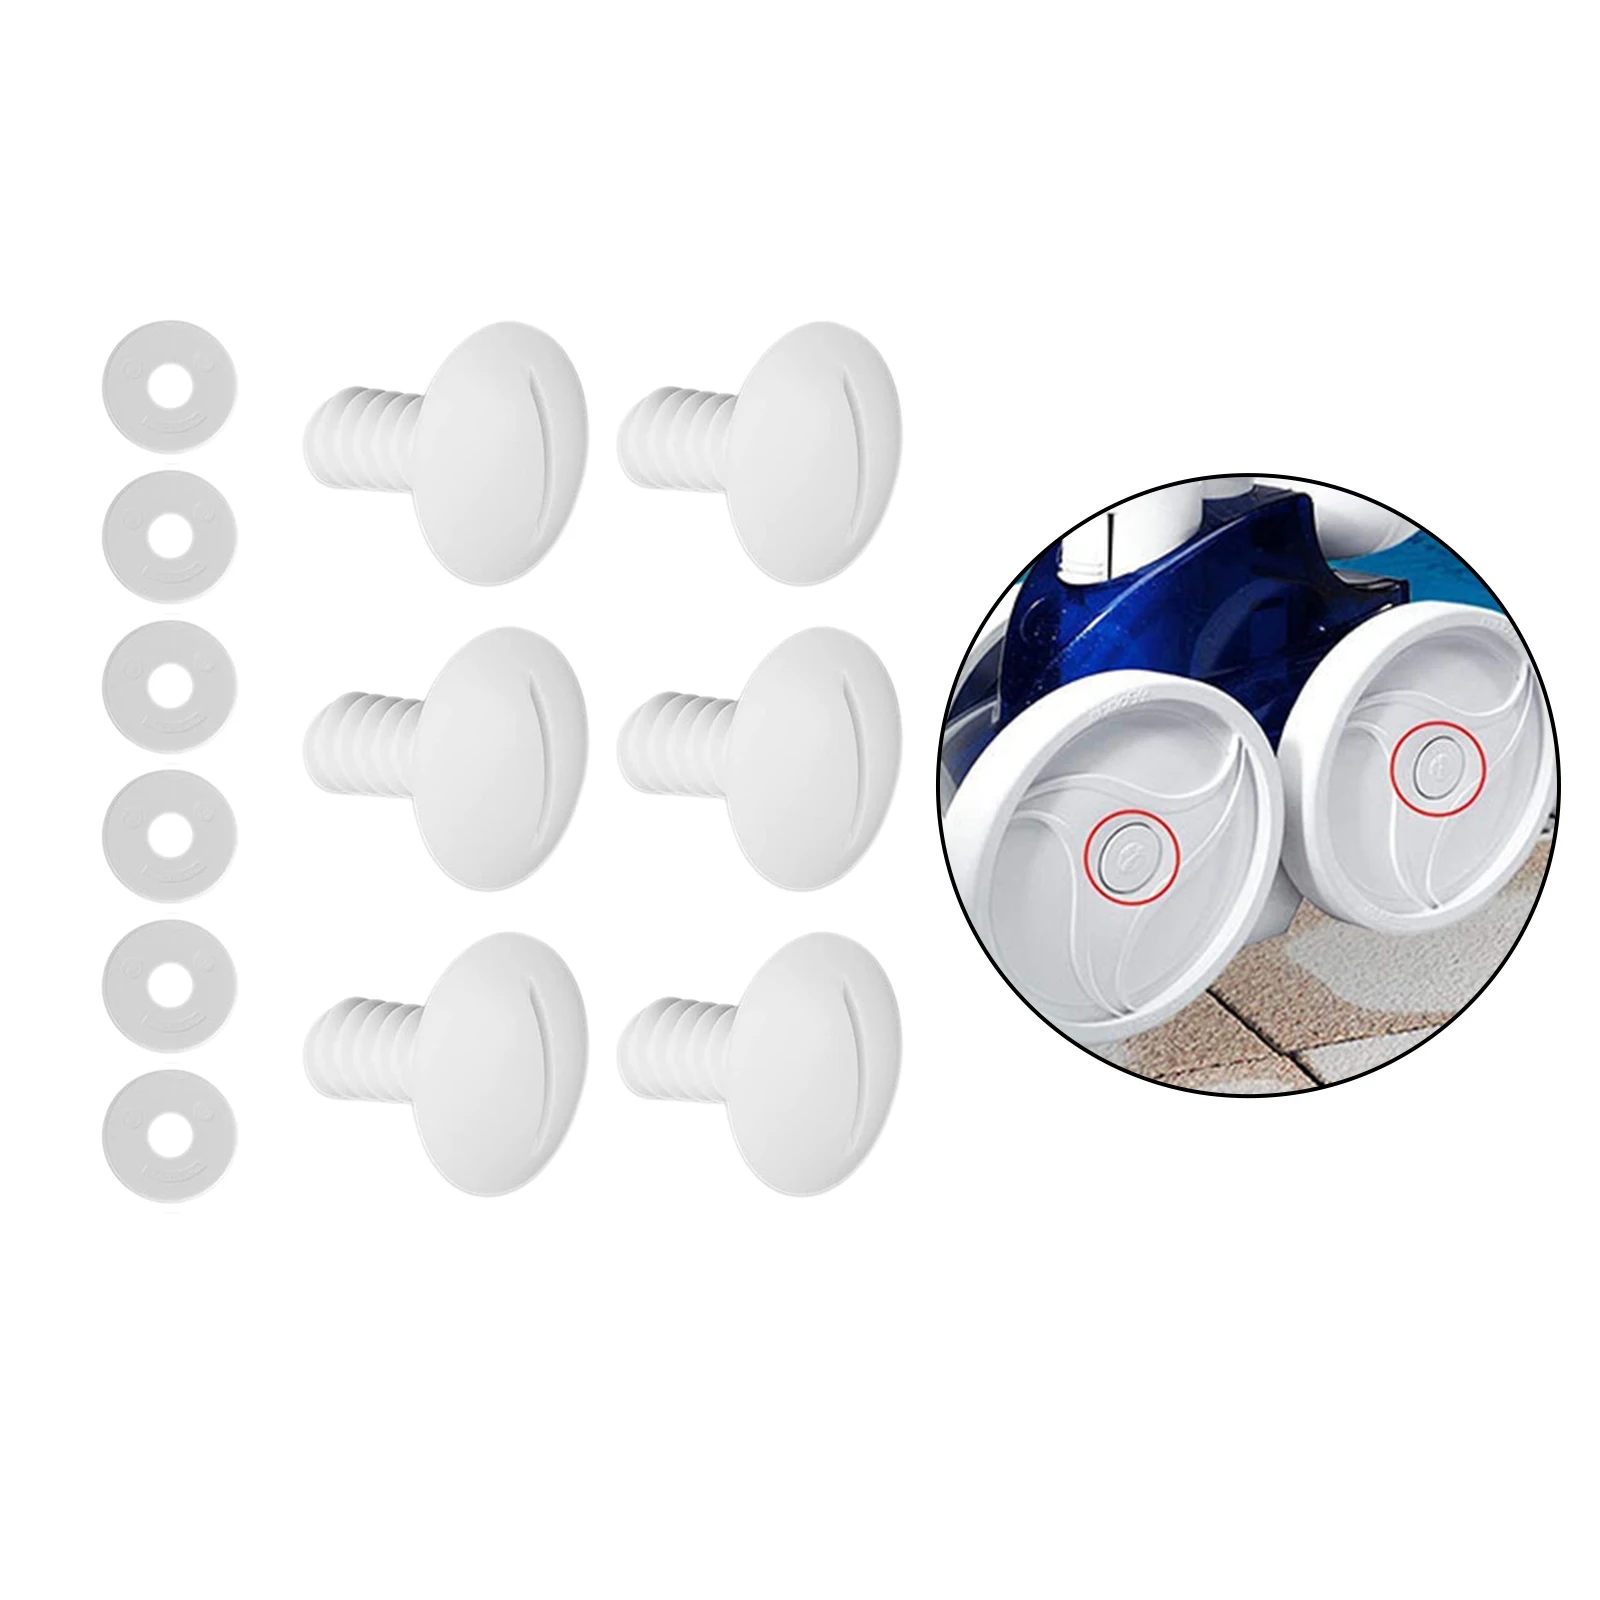 6 Sets White Plastic Wheel Screws with Washers C55 for Polaris 180 280 Pool Cleaner Accessories